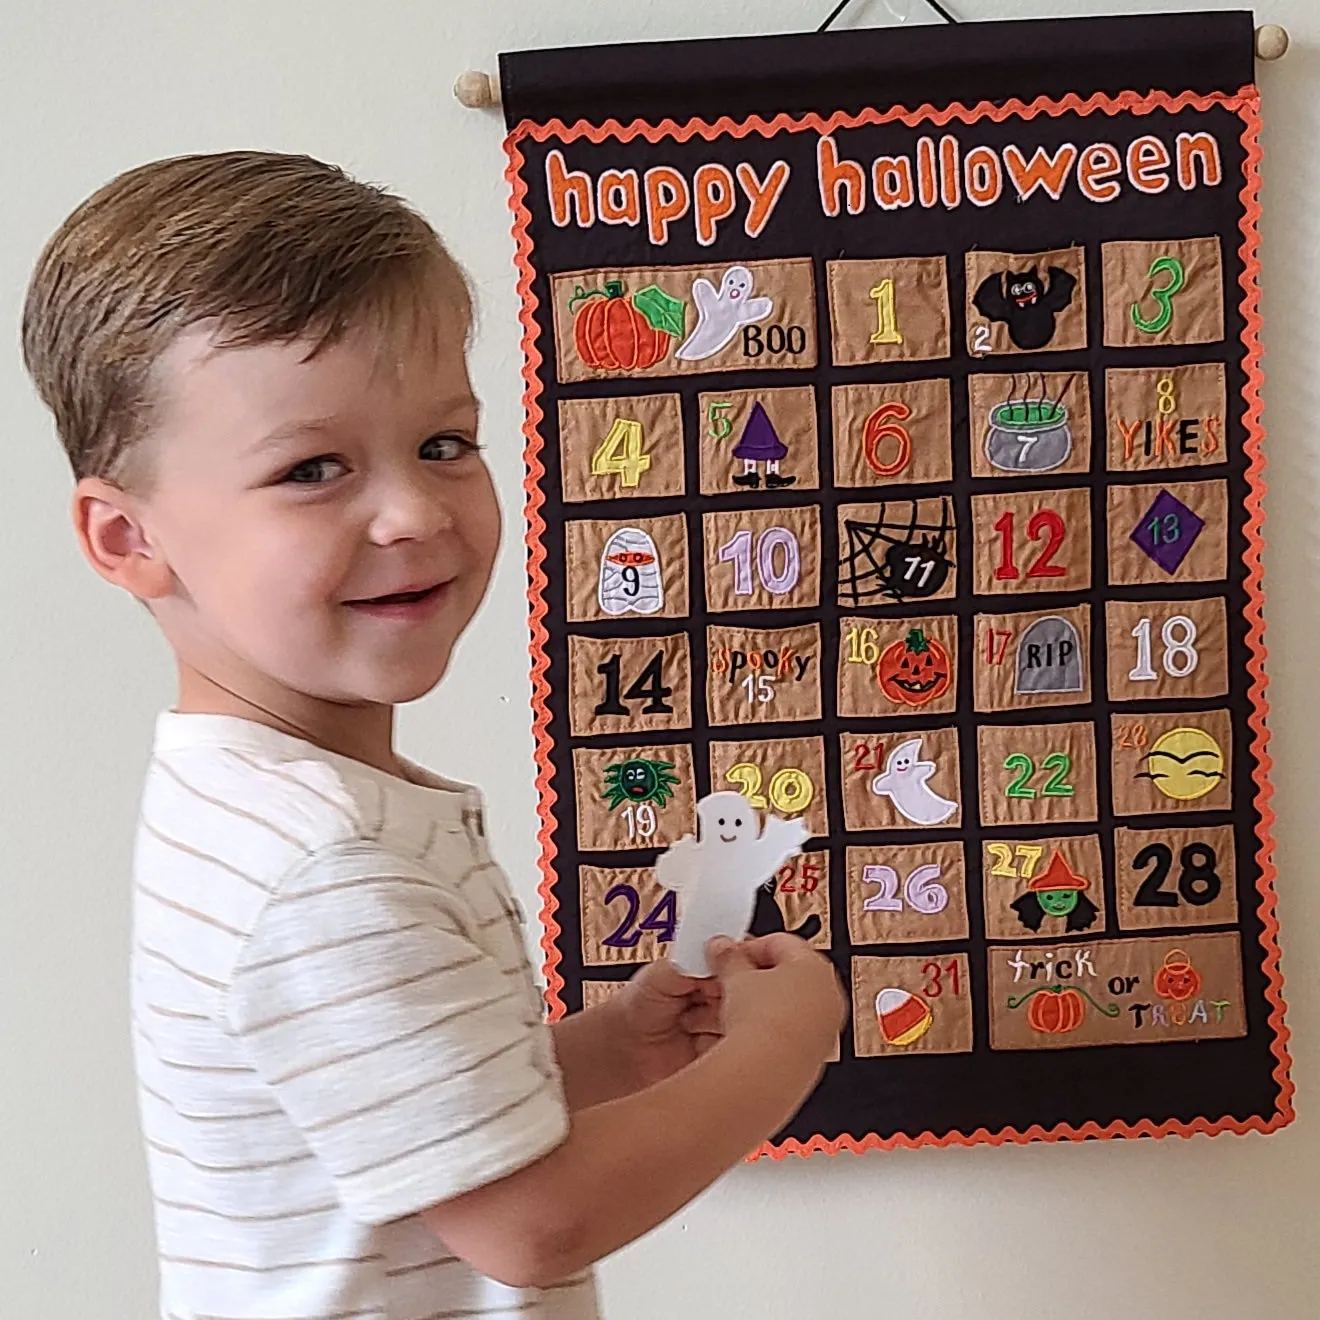 Halloween Countdown Advent Calendar Wall Hanging Fabric Décor by My Growing Season for Kids and Family Activity